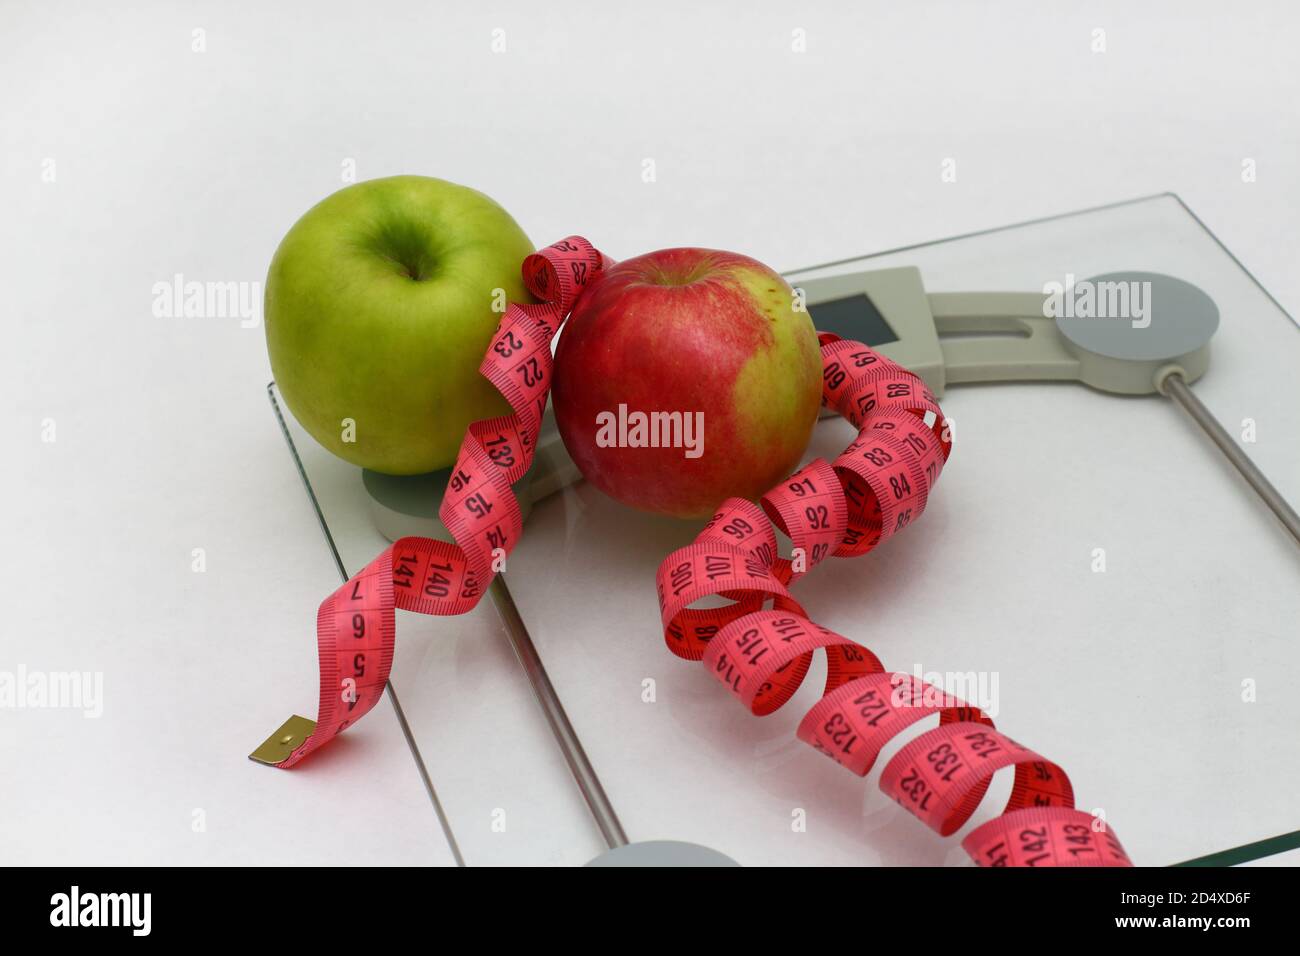 https://c8.alamy.com/comp/2D4XD6F/two-fresh-apples-green-and-red-with-pink-measuring-ribbon-lie-on-glass-floor-scales-white-background-2D4XD6F.jpg